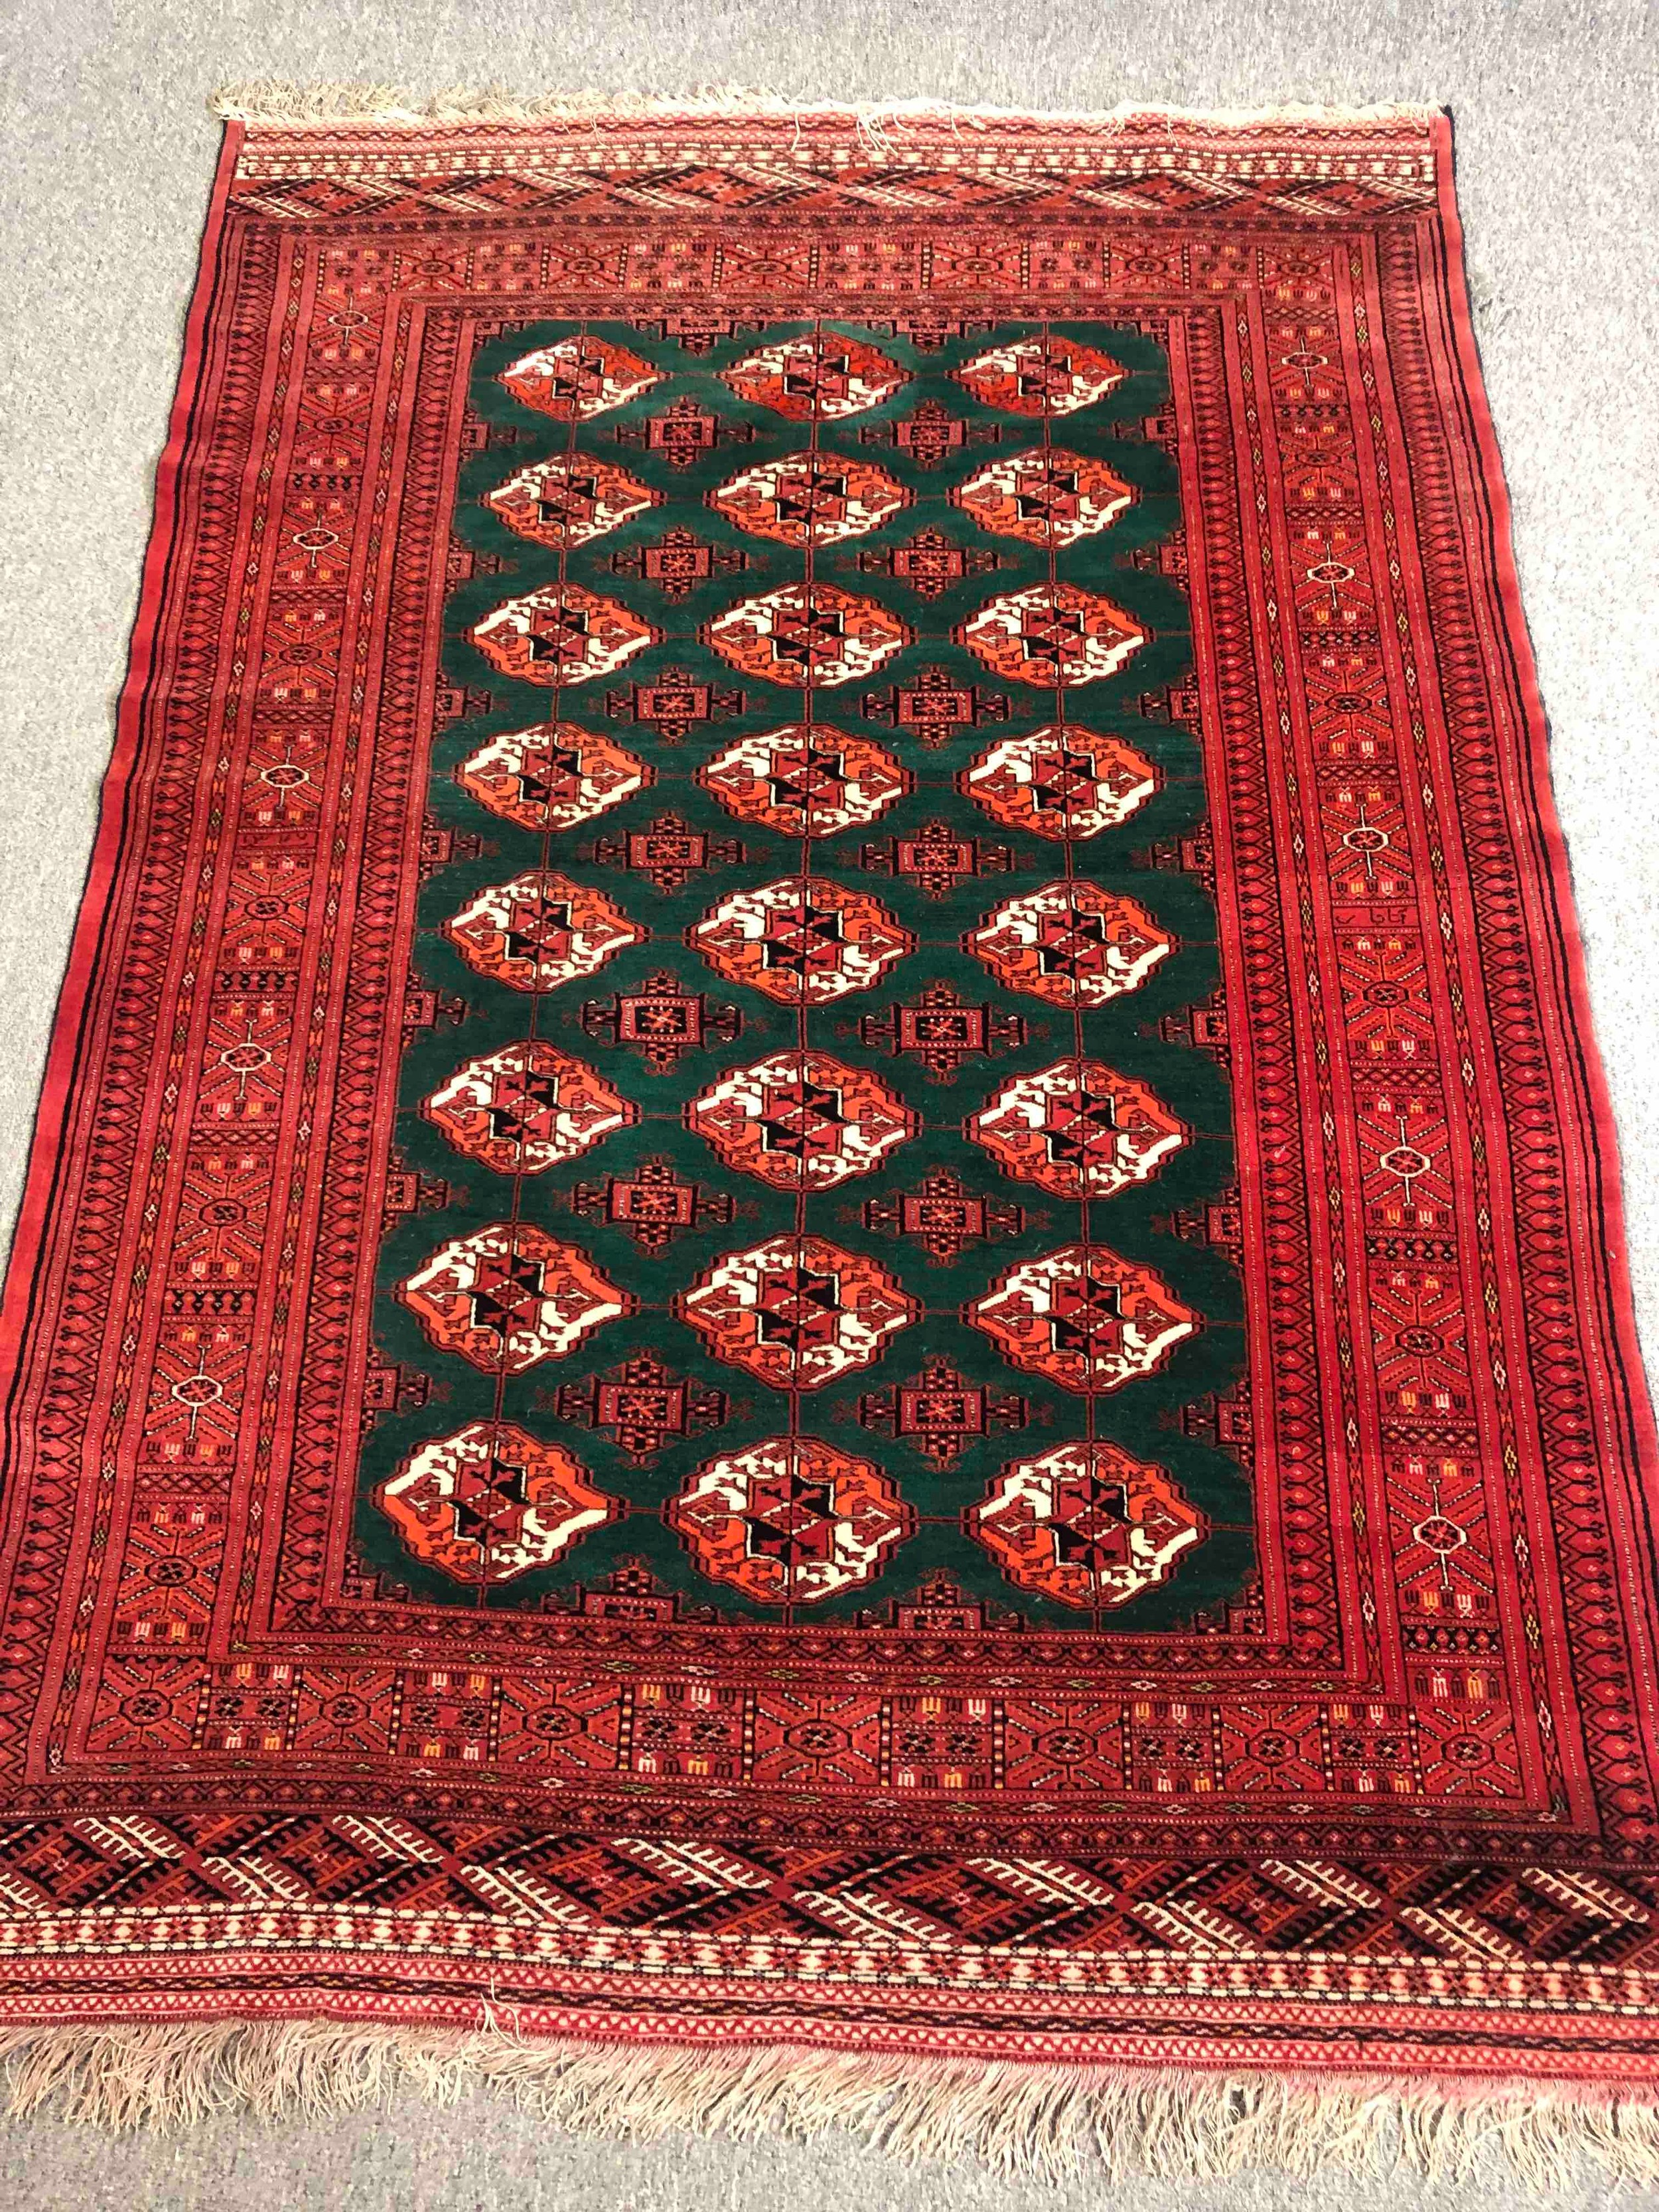 A Bokhara carpet with repeating gul motifs across the field within broad multiple stylised